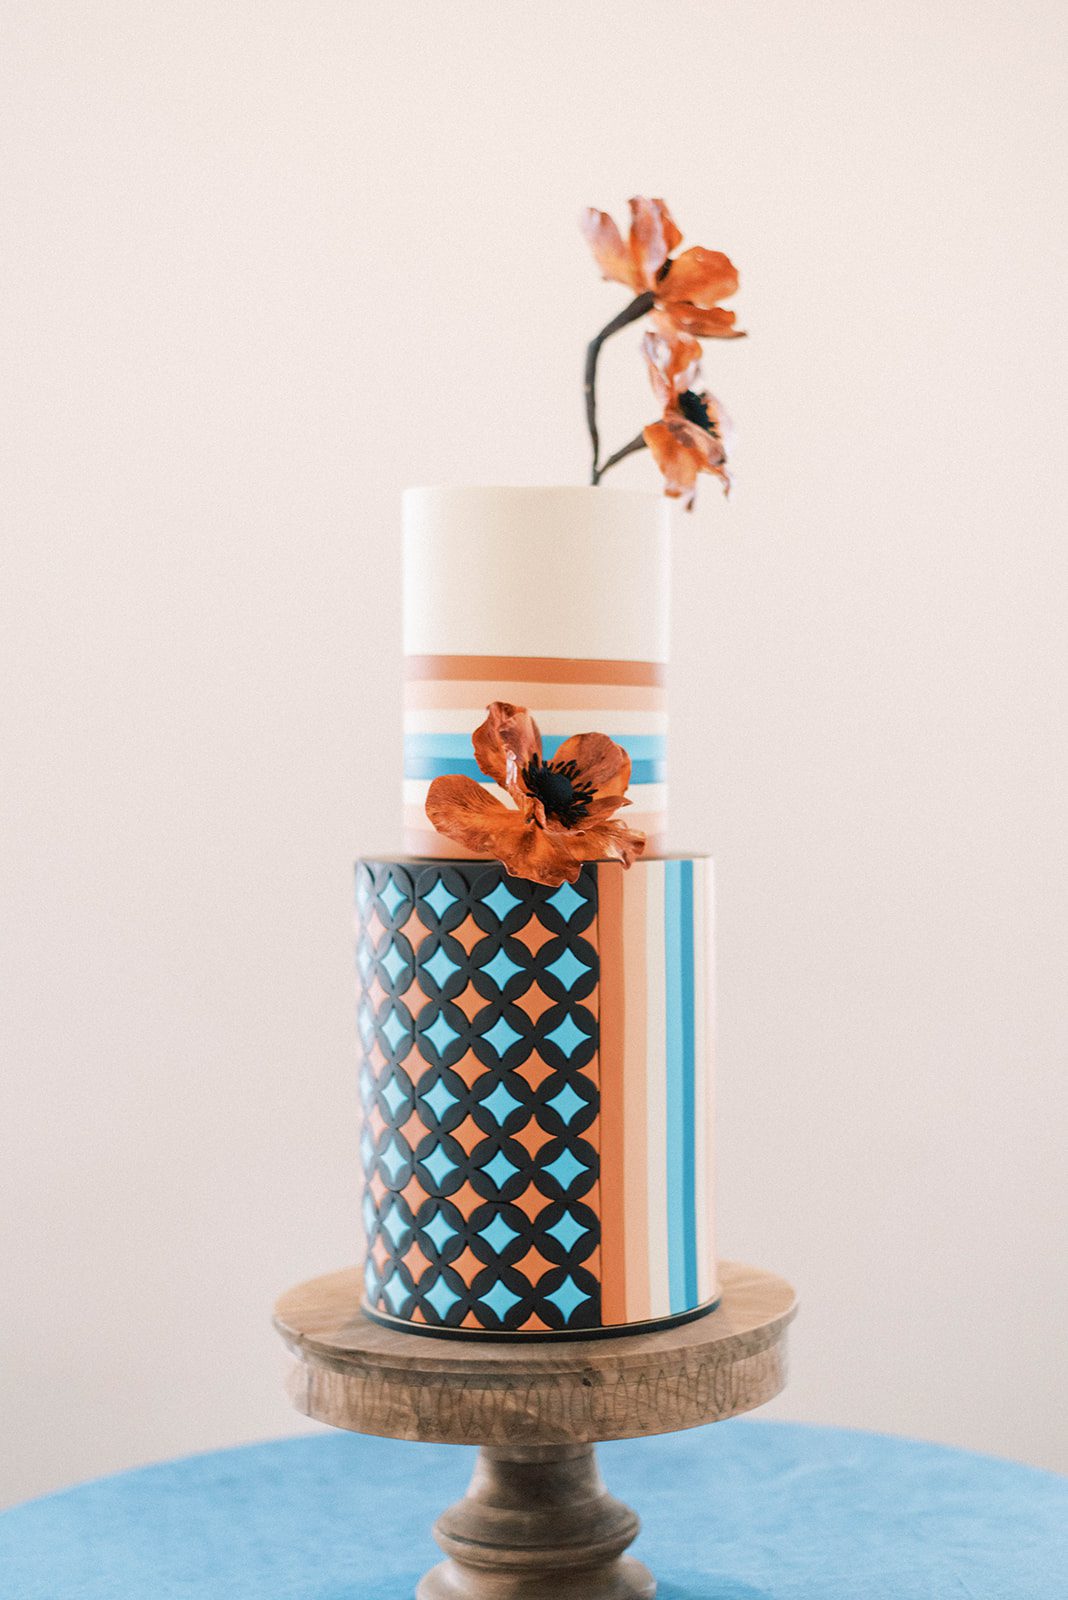 70s inspired burnt orange and blue wedding cake with flowers and diamond details